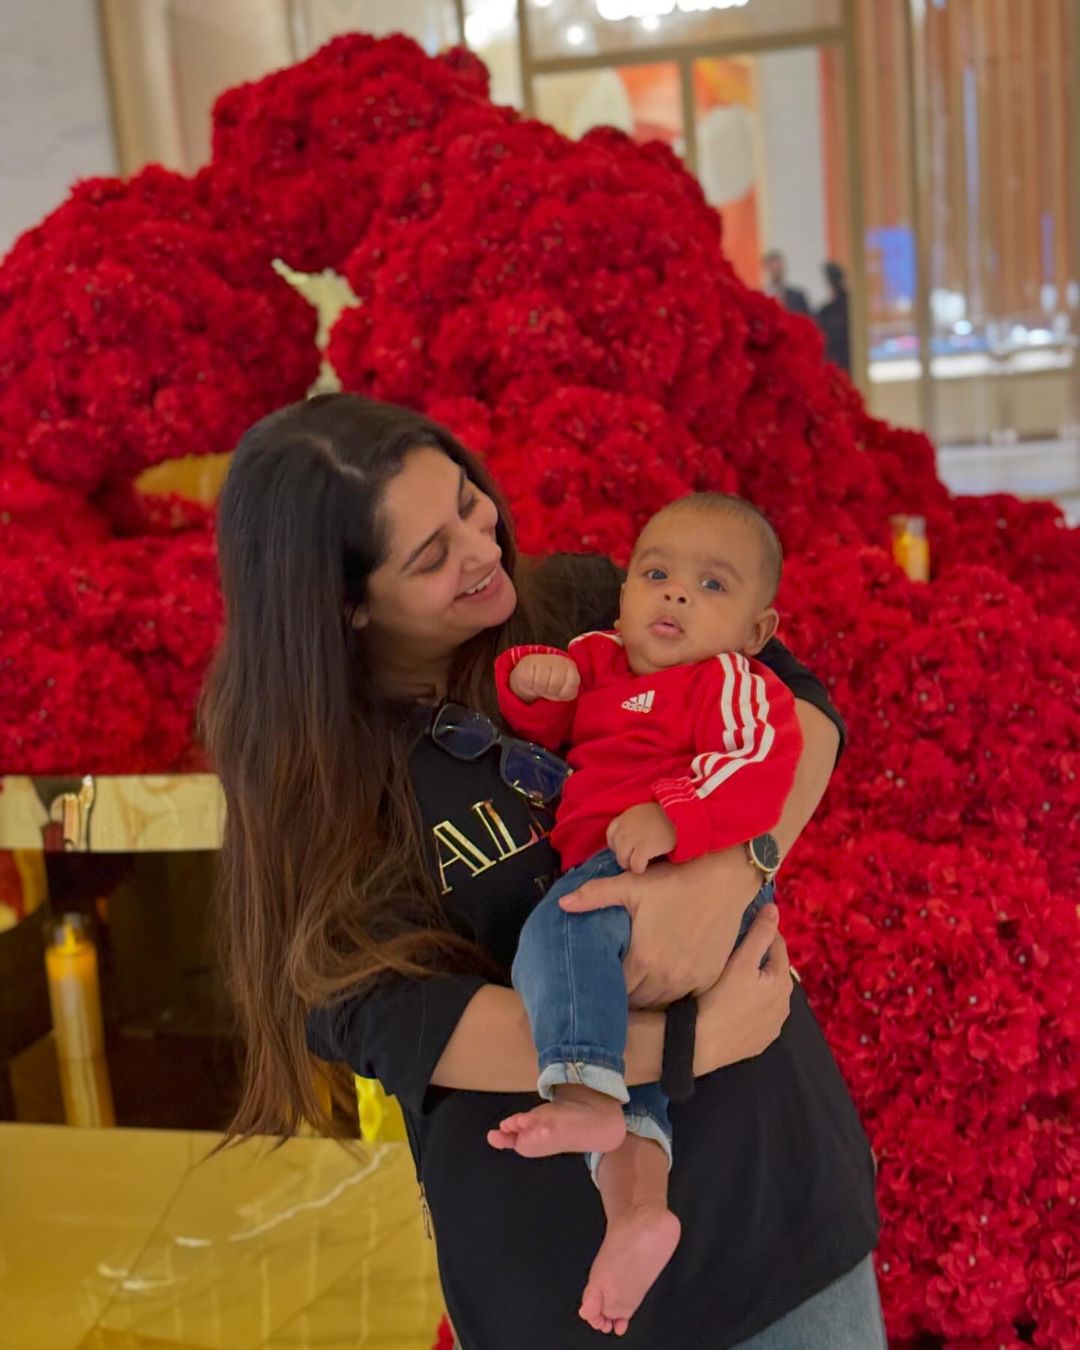 Dipika Karkar And Shoaib Ibrahim Little Boy Ruhaan Turn Six Months Old. She Said He Completes Her Who Being Part Of Her